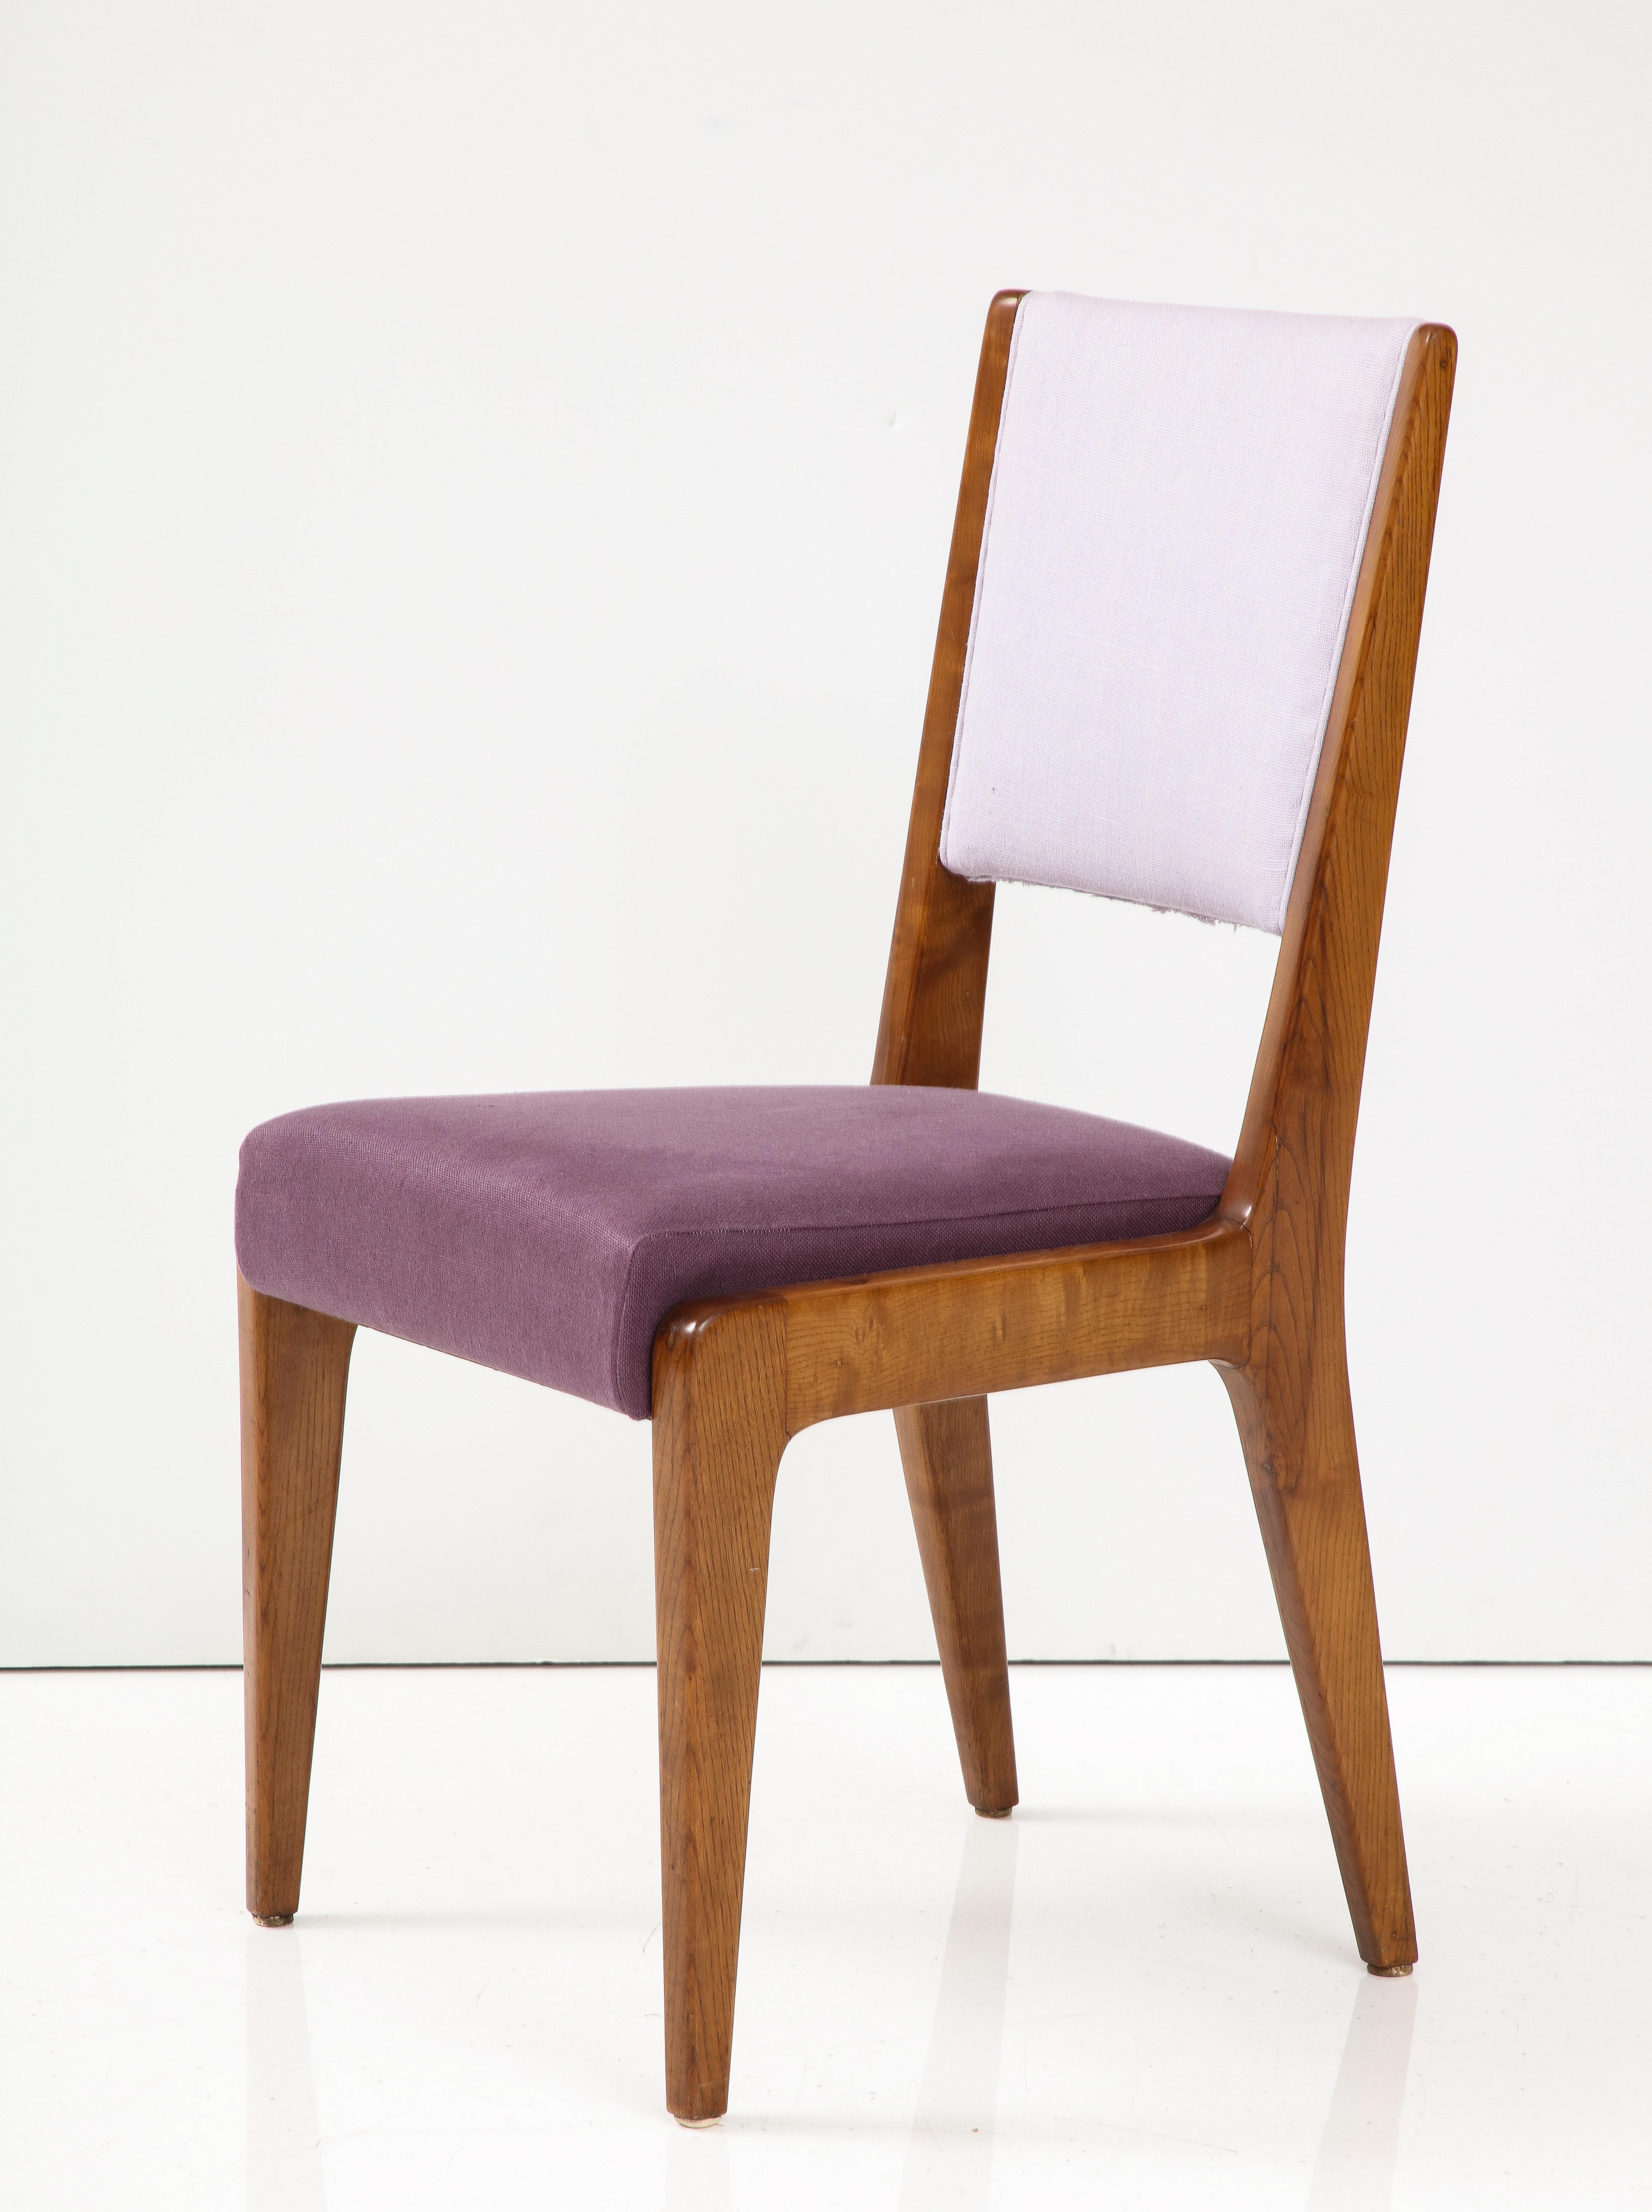 Linen Upholstered Oak Chair by Gio Ponti, Italy, circa. 1950s For Sale 8